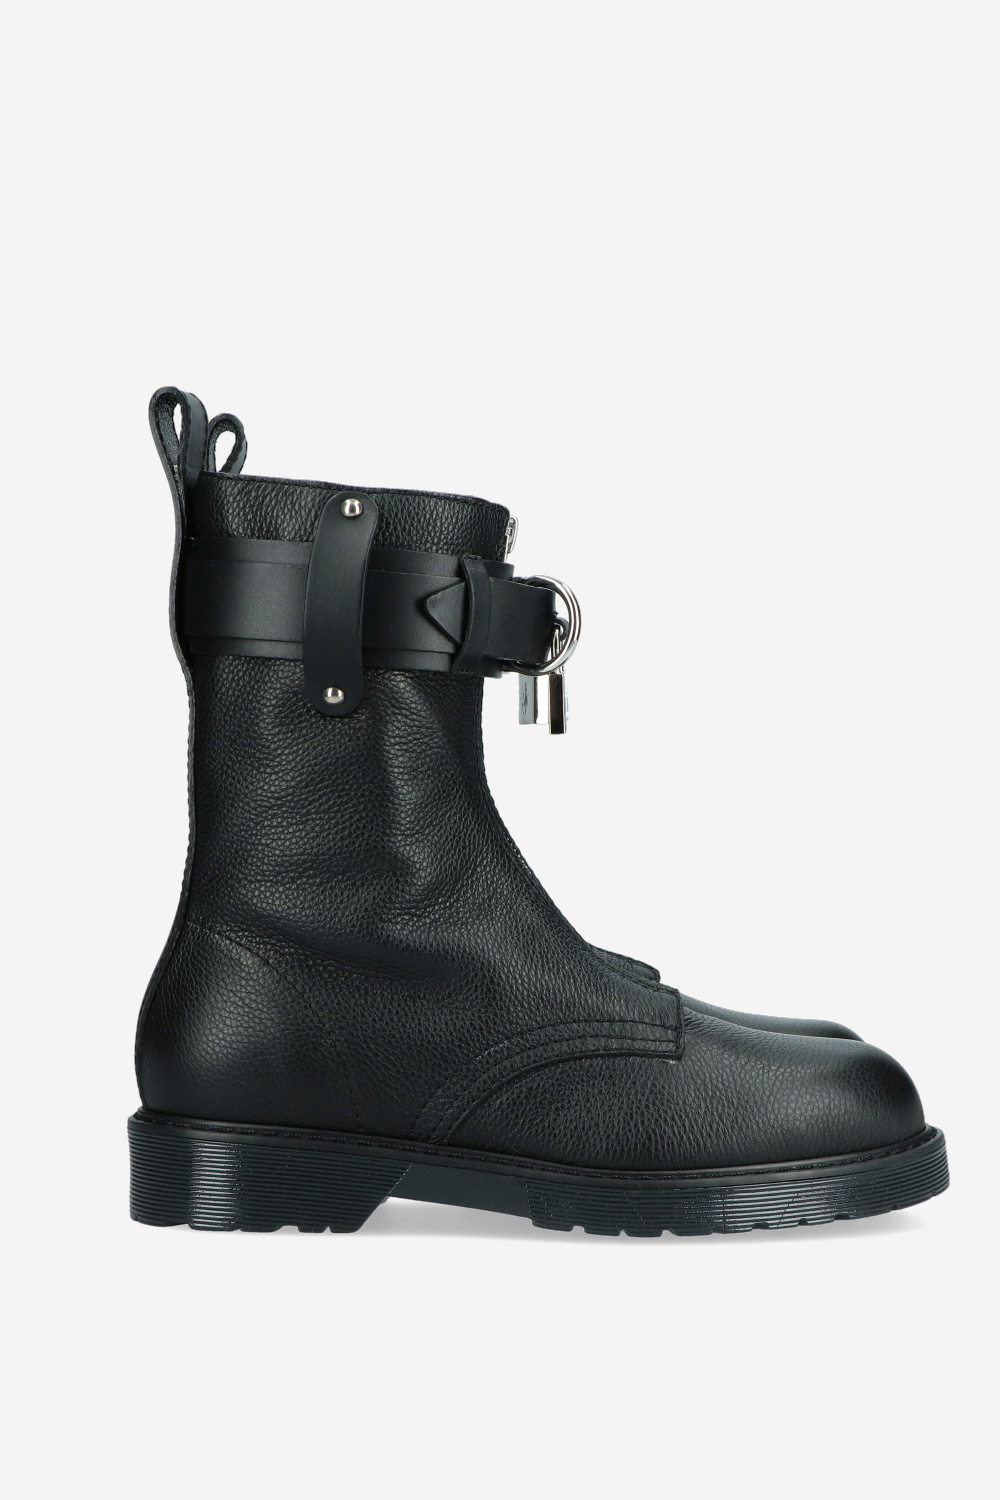 JW Anderson Boots Black